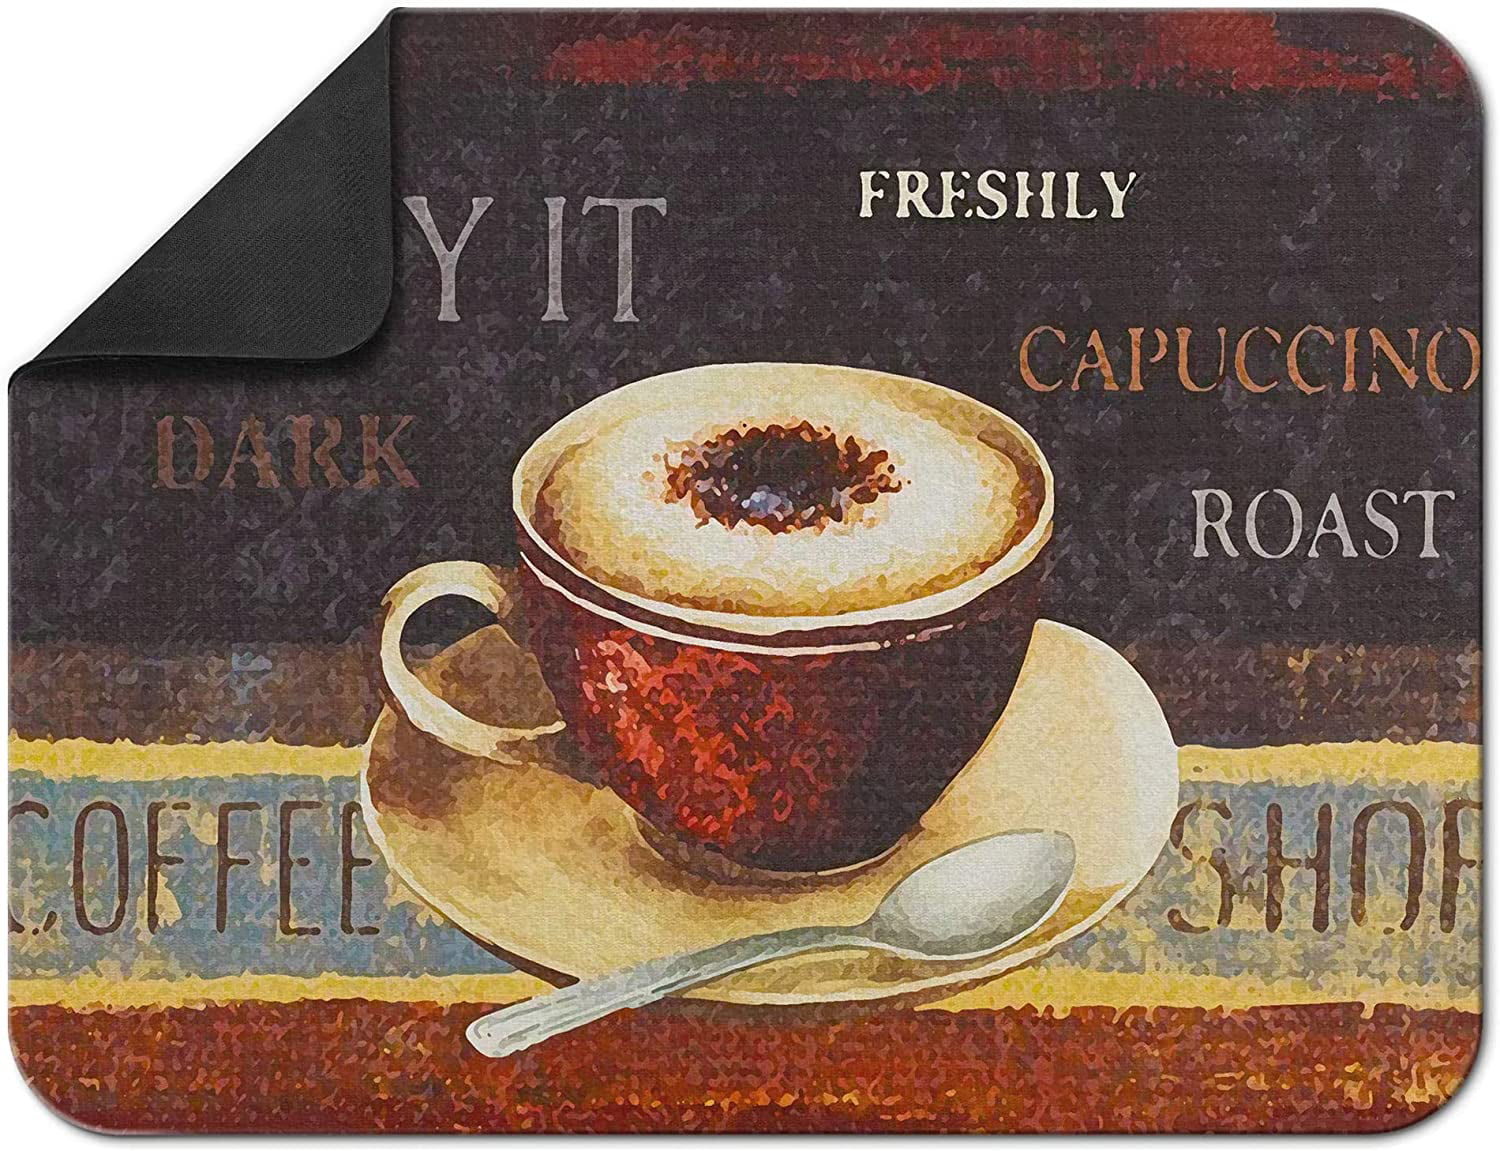 Artistic Beautiful Coffee Mat 24x18 Inch for Kitchen Counter